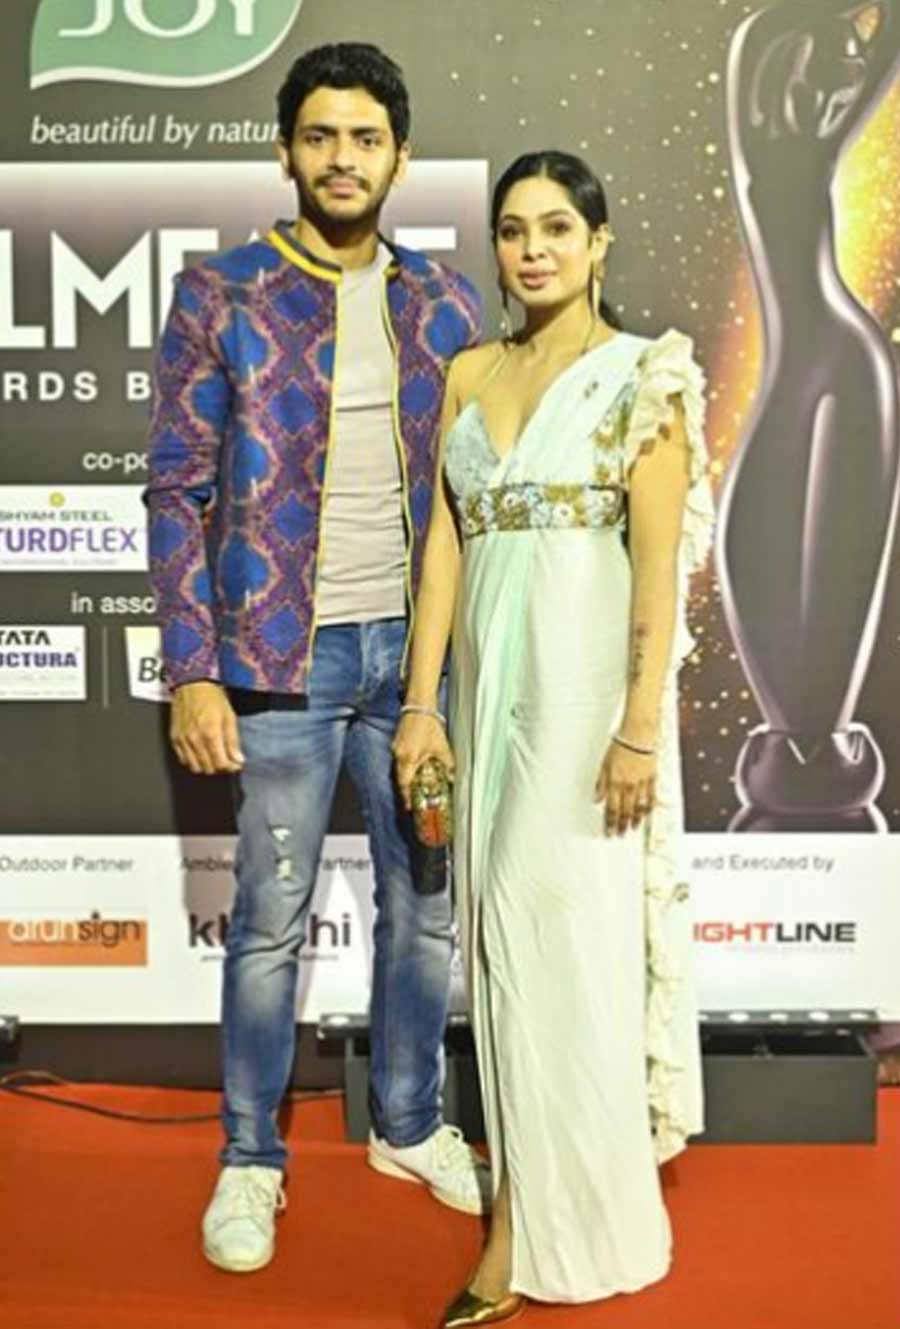 COUPLE GOALS: (From left) Actor Arjun Chakraborty with his wife Sreeja Chakraborty pose together on the red carpet at the Joy Filmfare Awards Bangla 2021 on Thursday, March 17. The actor won  the Critics' Award for Best Actor in a Leading Role (Male) for his performance in 'Avijatrik'. Arjun Chakraborty uploaded this photograph on Instagram and thanked his wife for "being a constant pillar of support..."